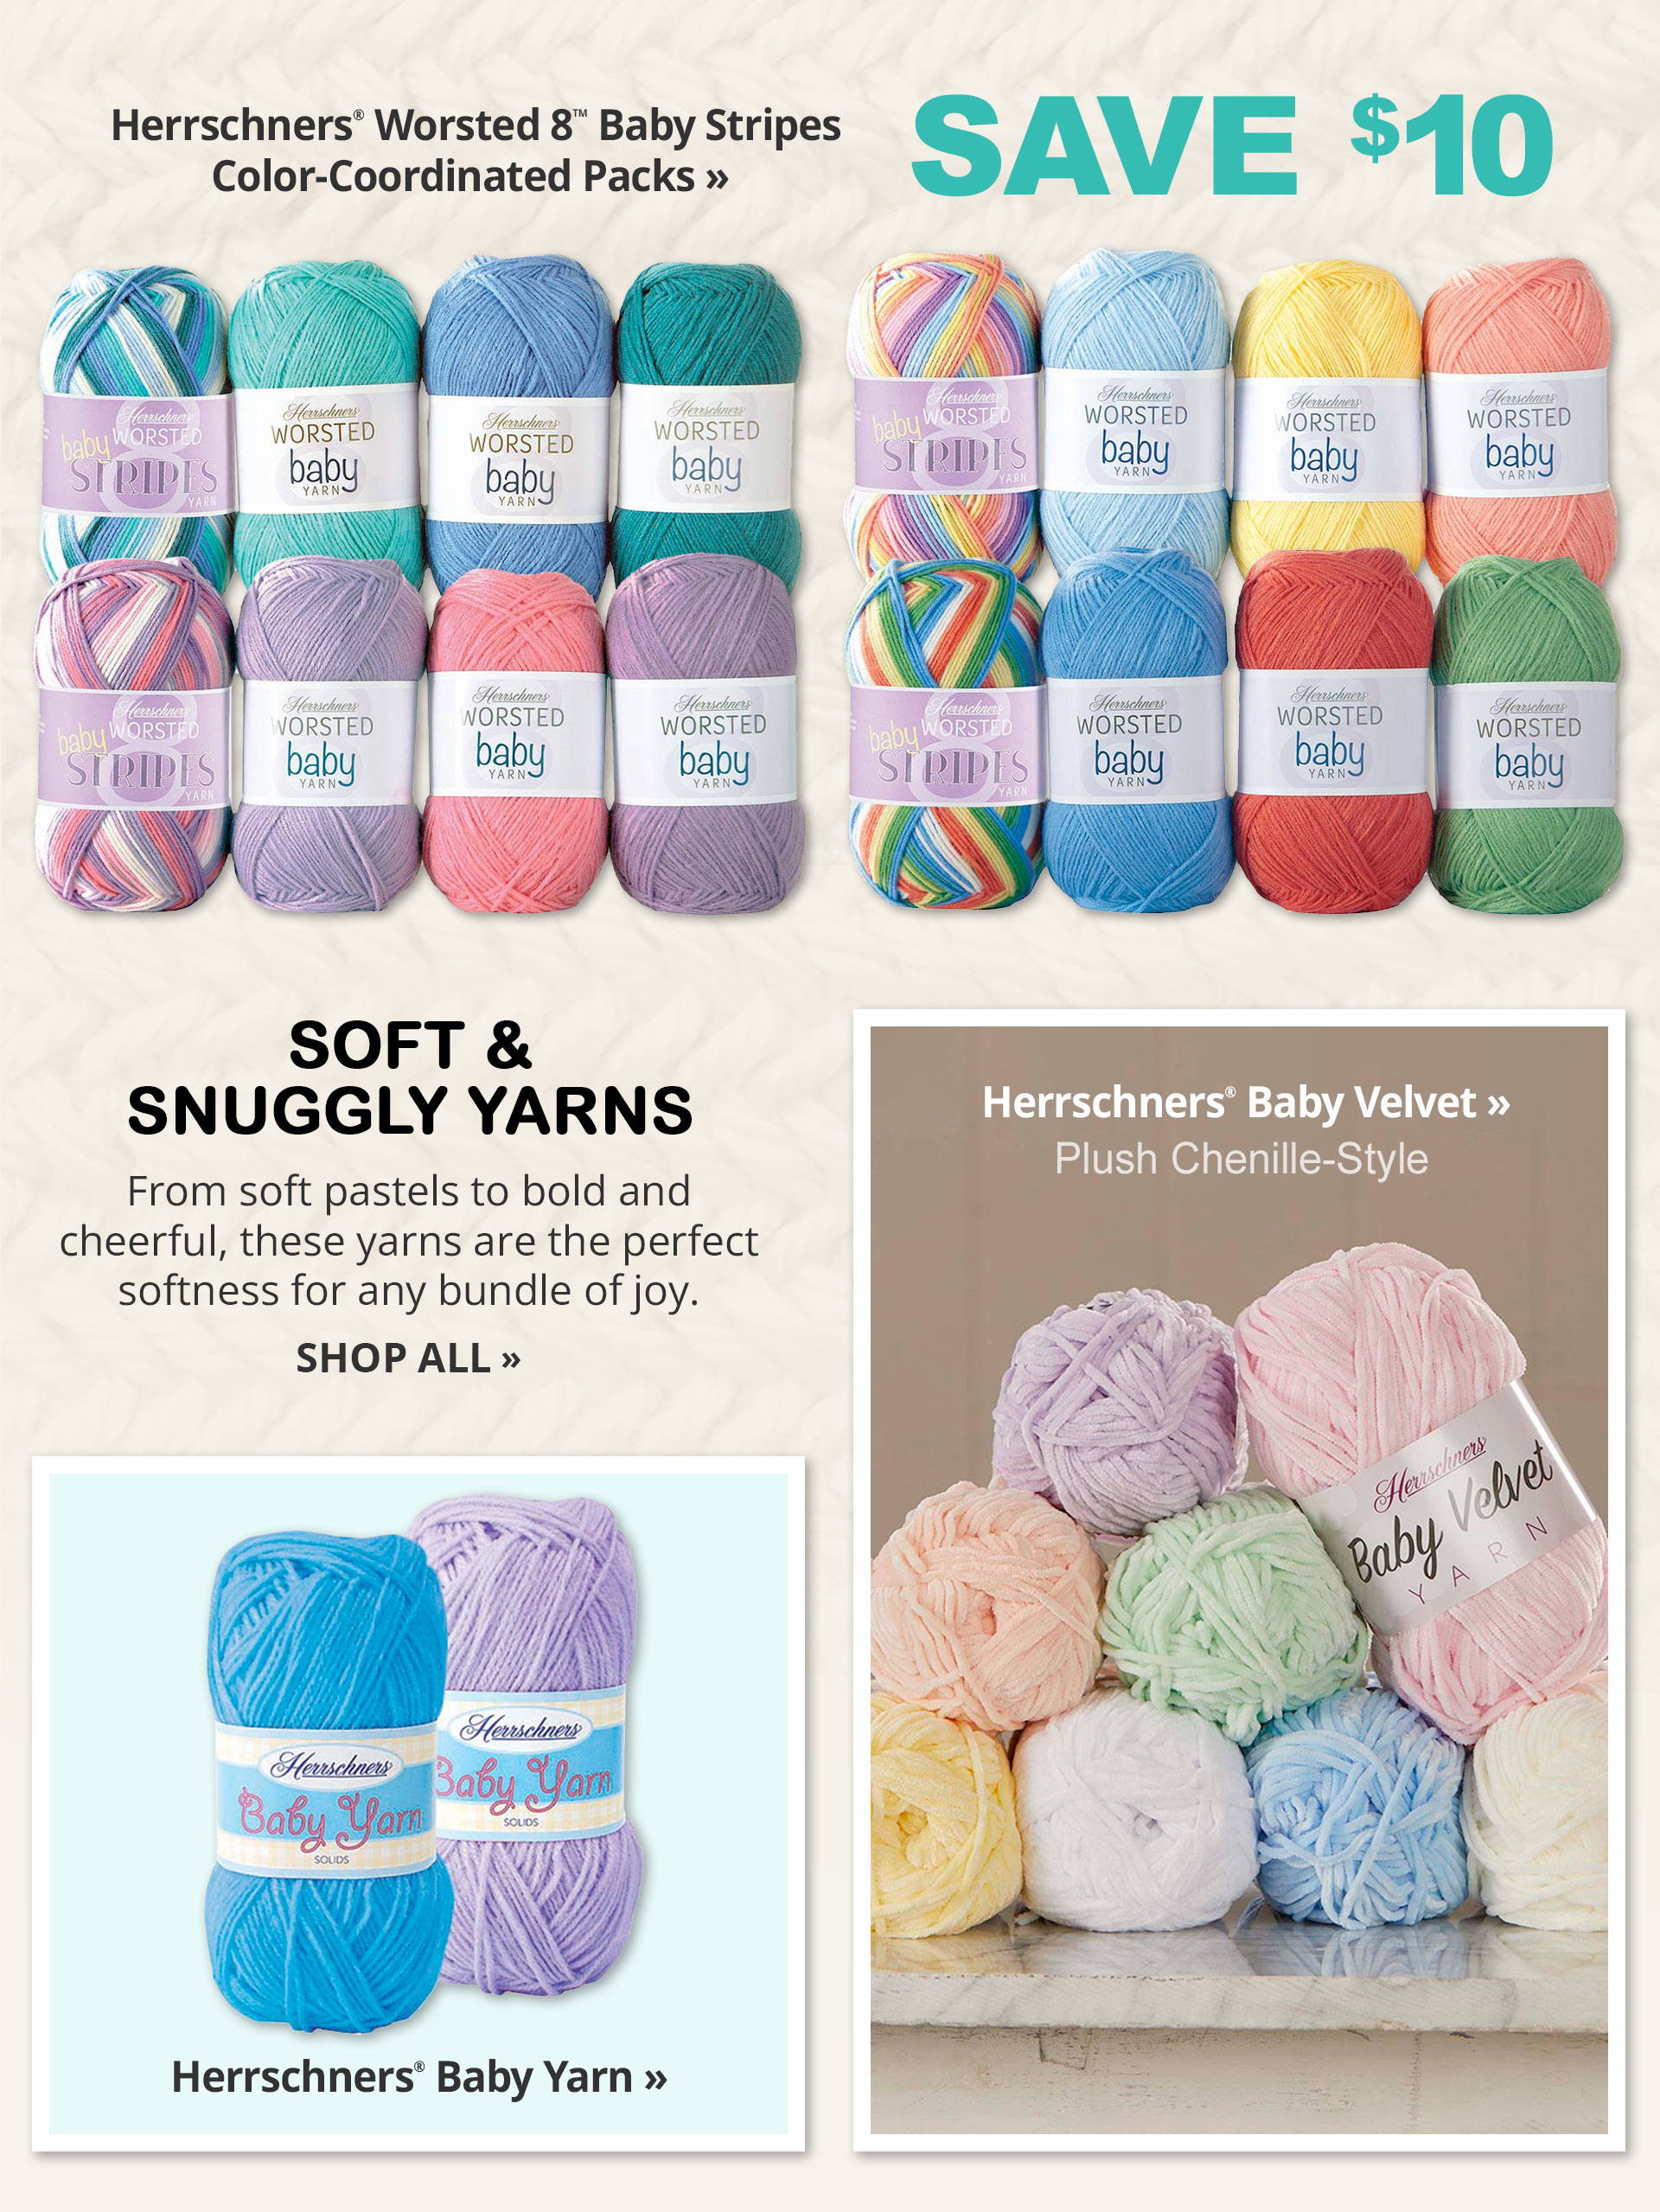 SOFT & SNUGGLY YARNS From soft pastels to bold and cheerful, these yarns are the perfect softness for any bundle of joy. - Herrschners® Worsted 8™ Baby Stripes Color-Coordinated Packs Save $10 - Herrschners® Baby Velvet Plush Chenille-Style - Herrschners® Baby Yarn - SHOP ALL>>